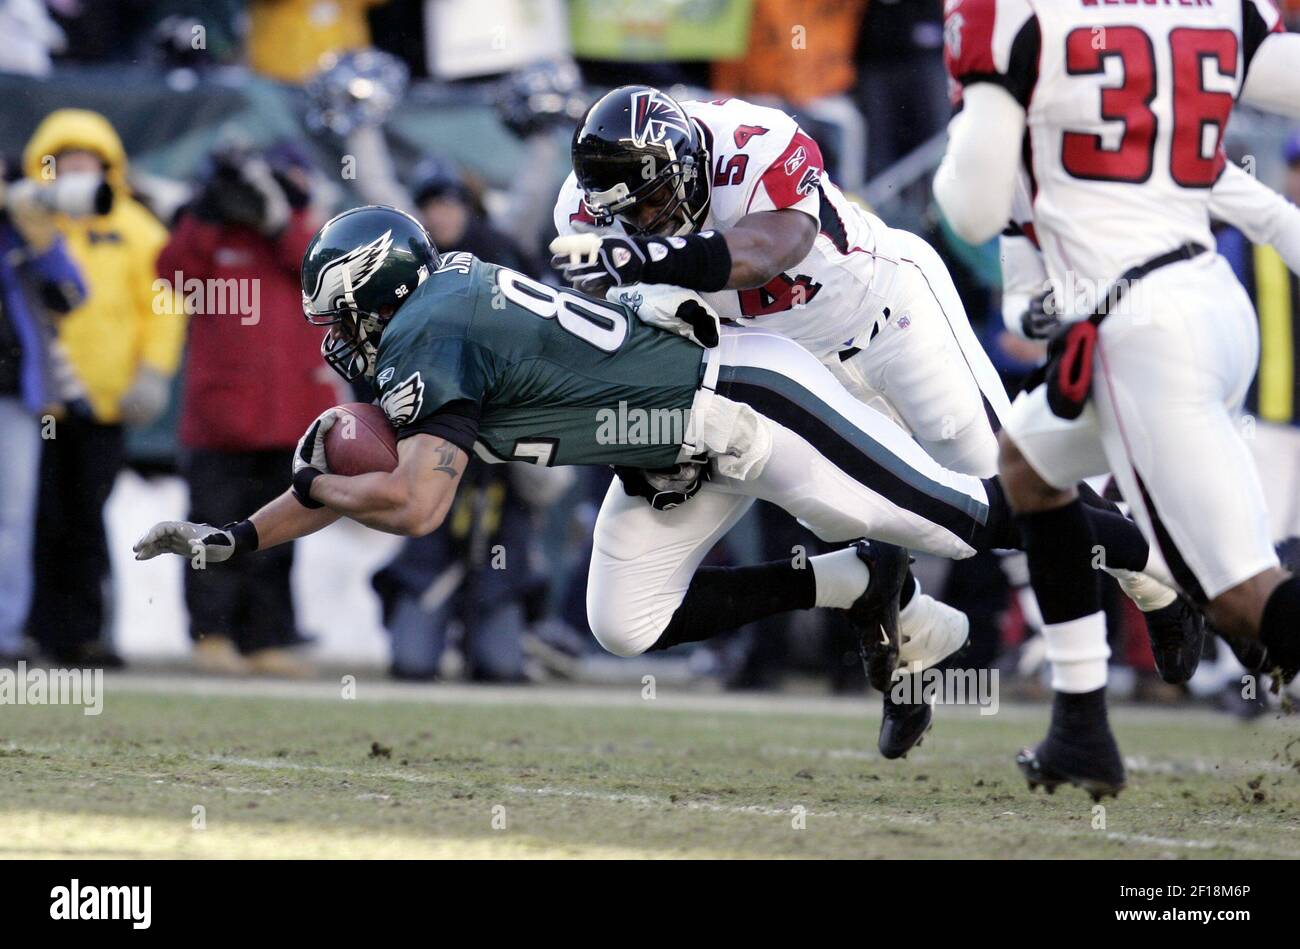 KRT SPORTS STORY SLUGGED: FALCONS-EAGLES KRT PHOTOGRAPH BY RON CORTES/PHILADELPHIA INQUIRER (January 23) PHILADELPHIA, PA -- Philadelphia Eagles tight end L. J. Smith is brought down by Atlanta Falcons linebacker Chris Draft after catching 21-yard first quarter pass in the NFC Championship at Lincoln Financial Field in Philadelphia, Pennsylvania, on January 23, 2005. (Photo by cdm) 2005 Stock Photo